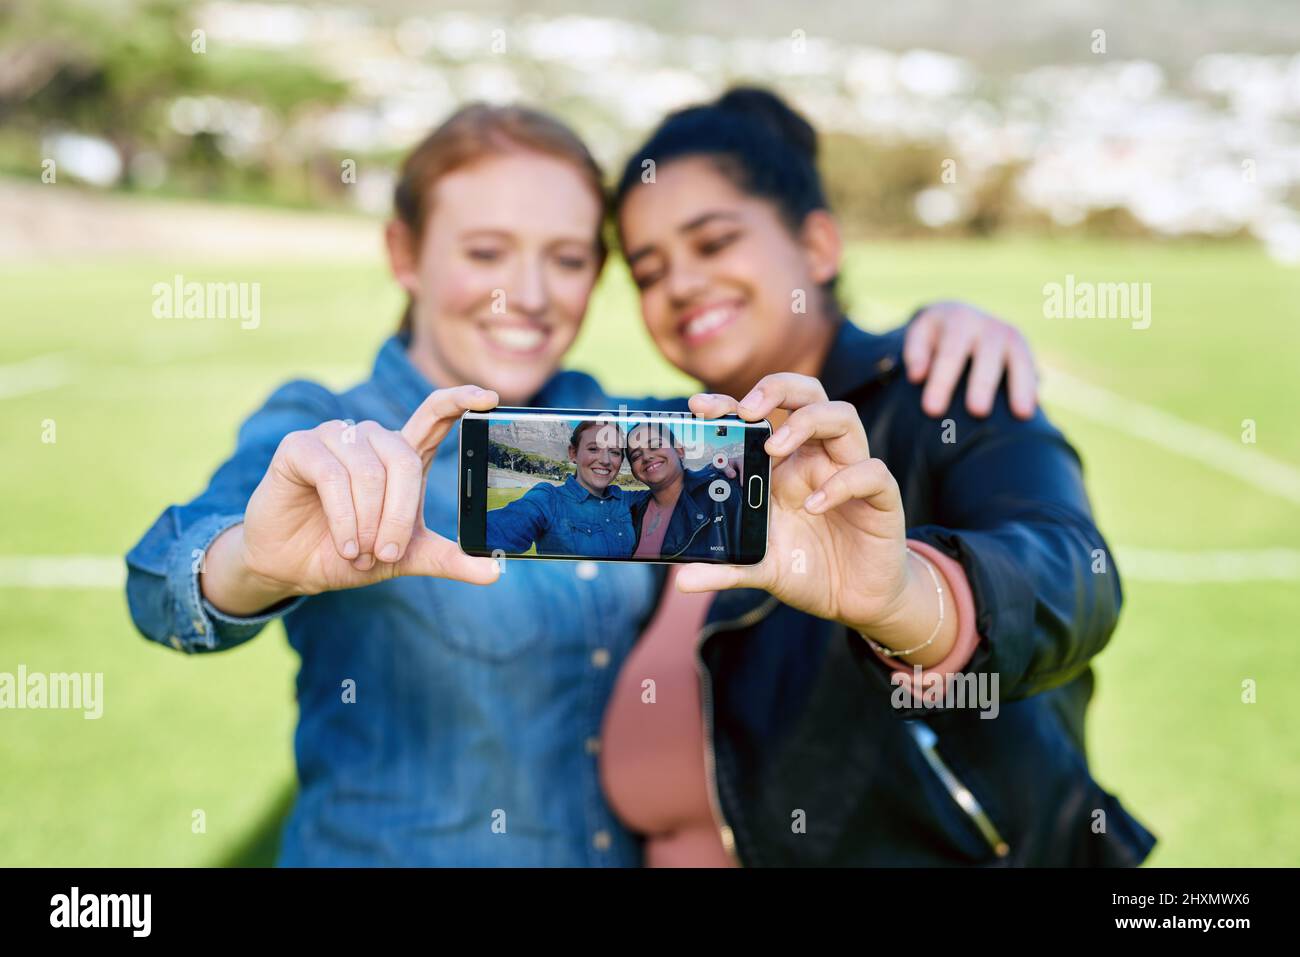 We have to capture our friendship together. Shot of female friends taking a picture together outside. Stock Photo